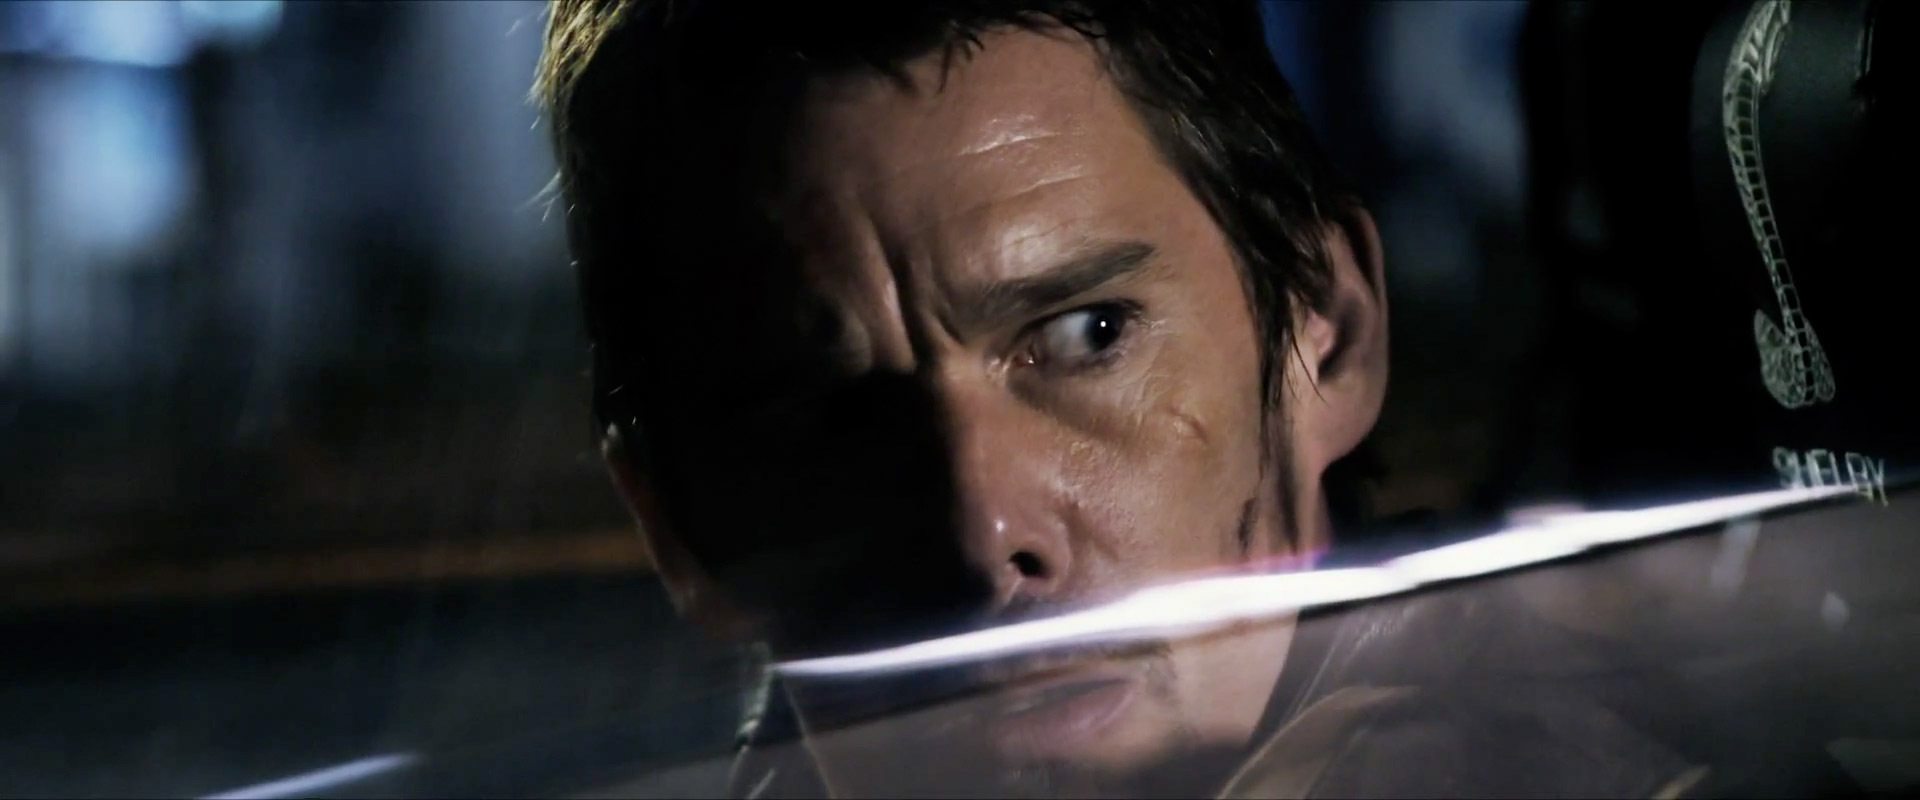 new-trailer-for-ethan-hawkes-action-thriller-getaway-12.jpg